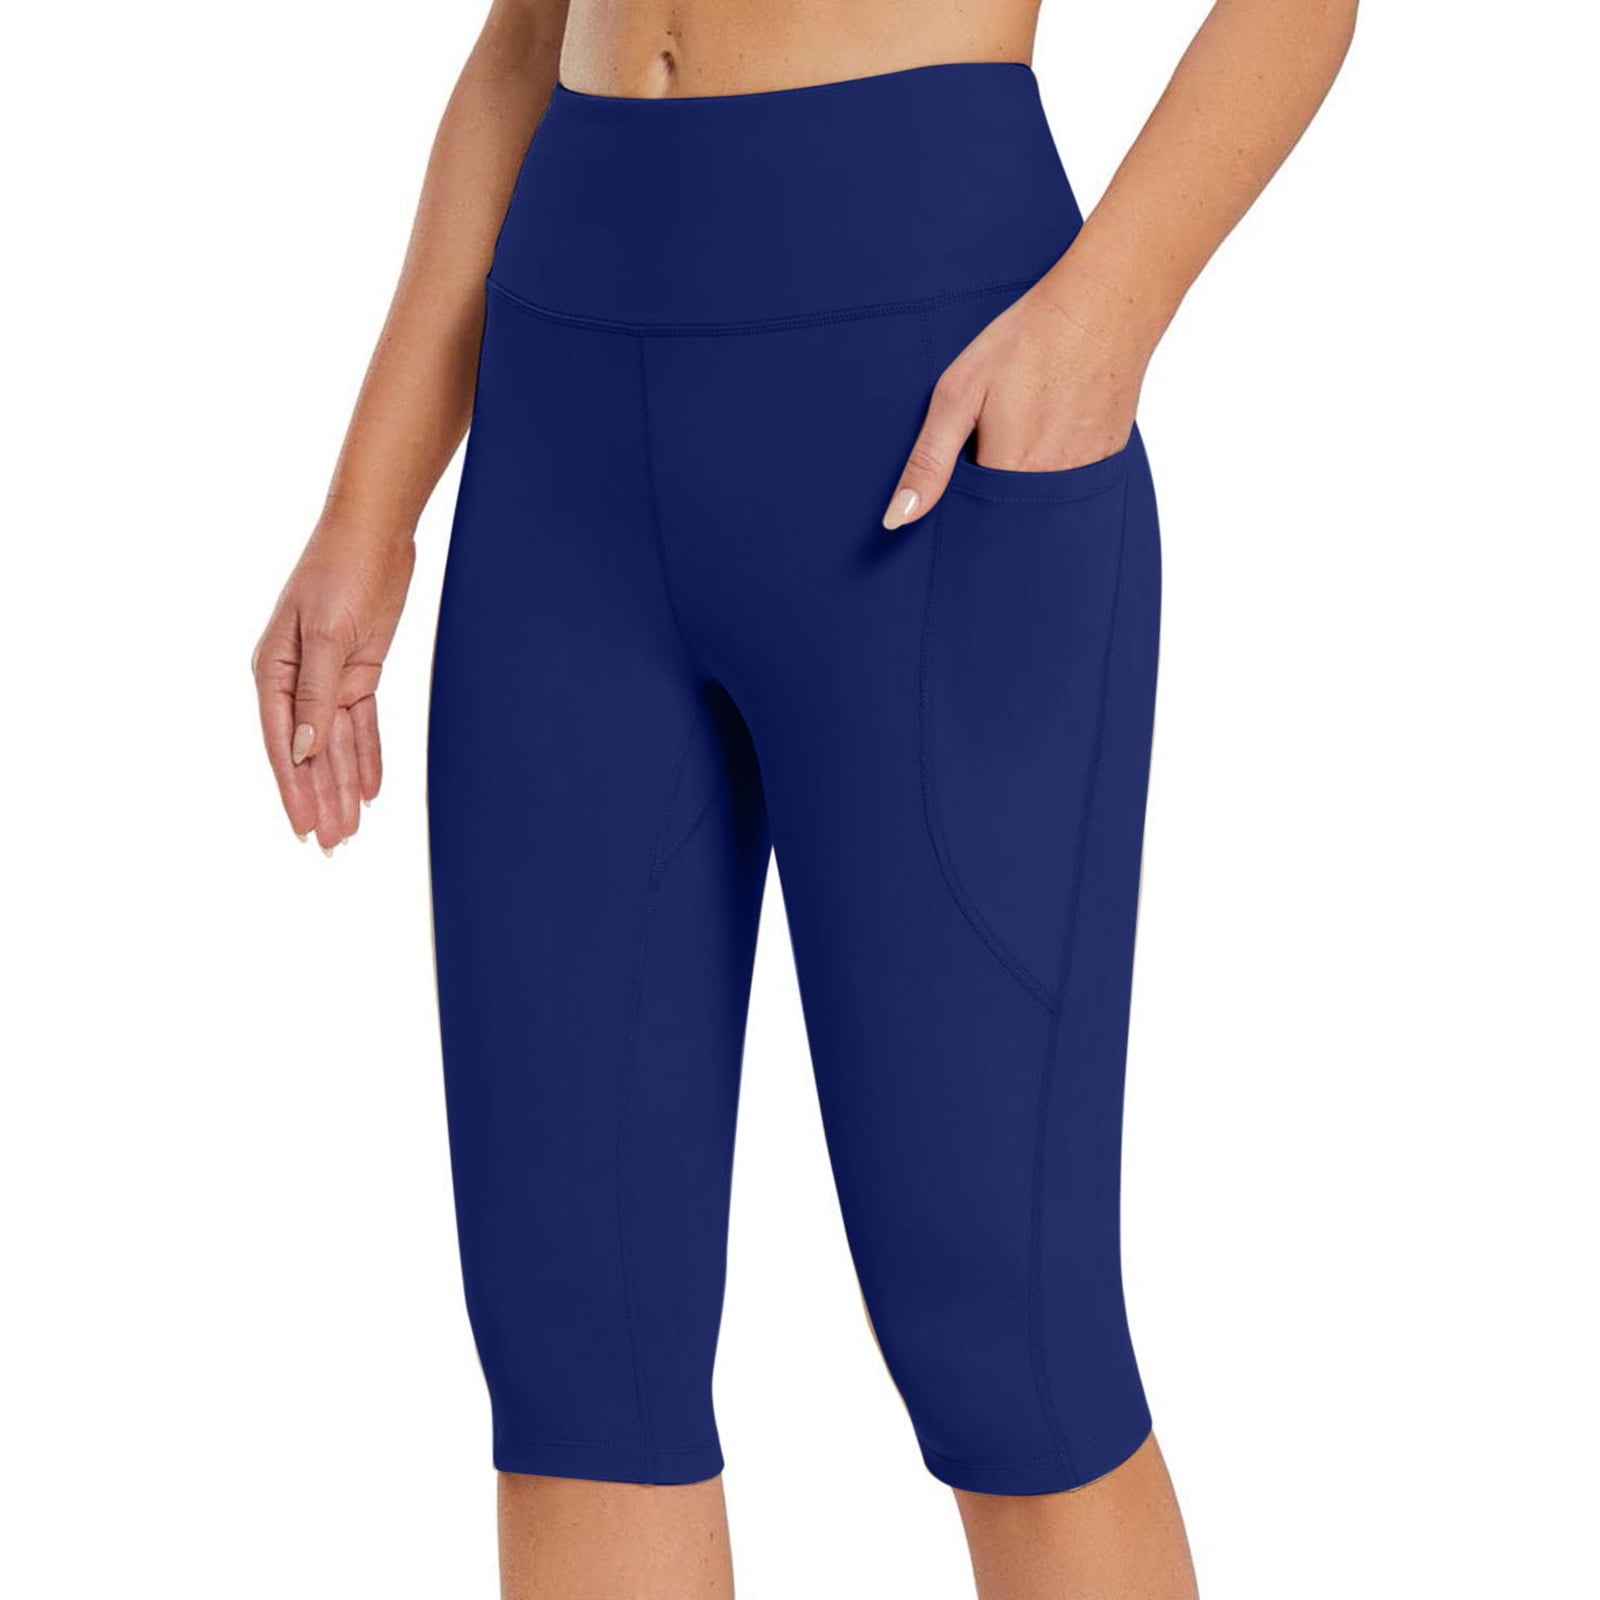 Women's Stretchable Lycra 3/4th Capri with 2 Zippered Pockets for Gym